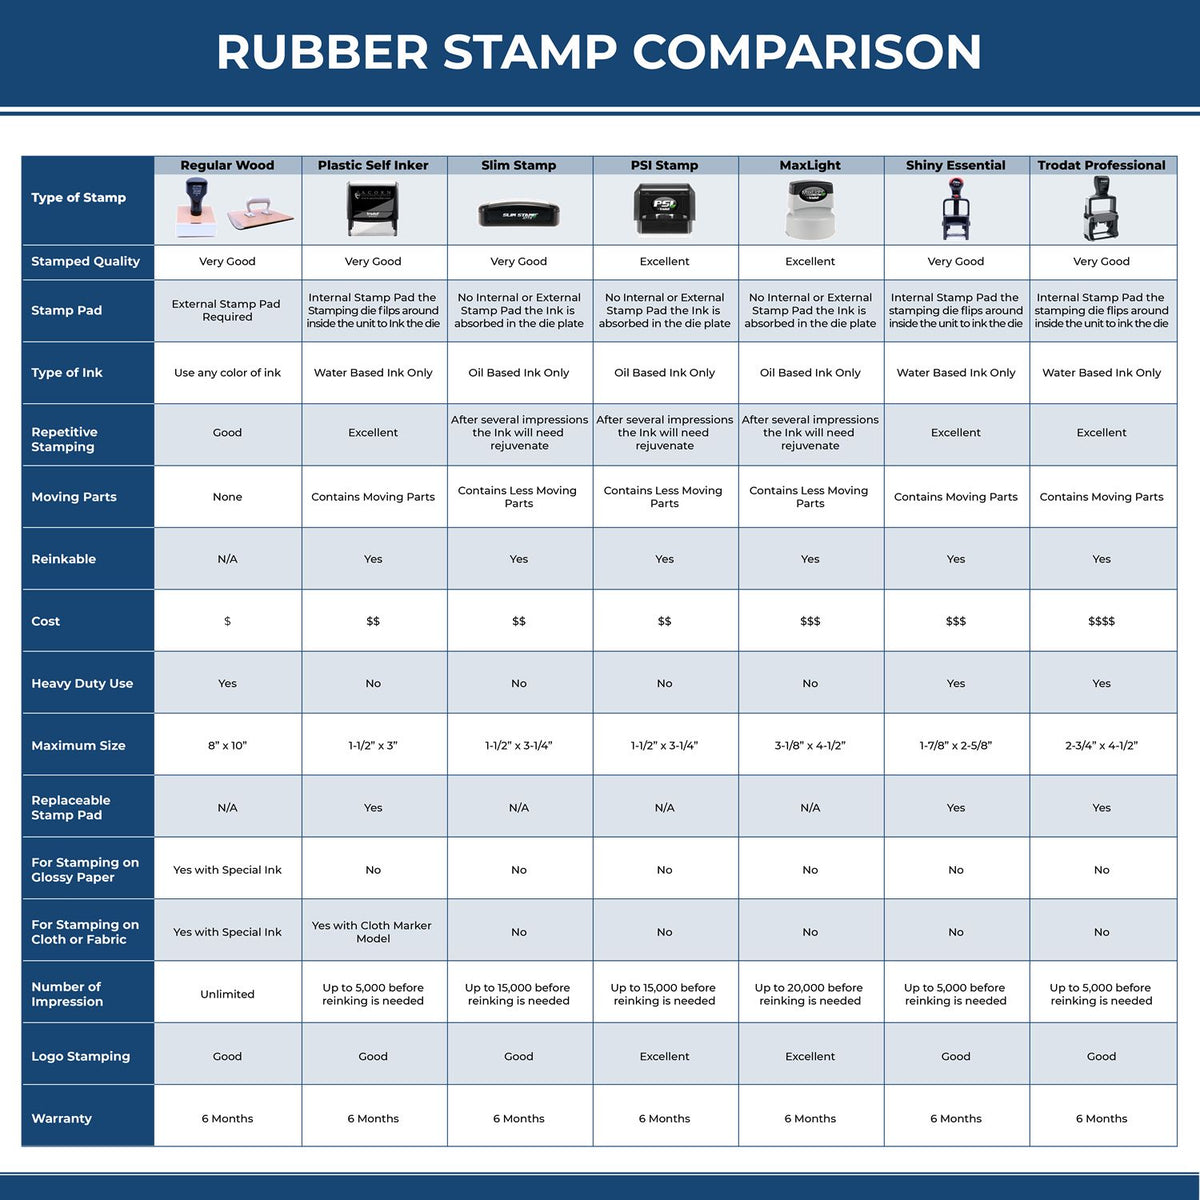 A comparison chart for the different types of mount models available for the Self-Inking Missouri PE Stamp.